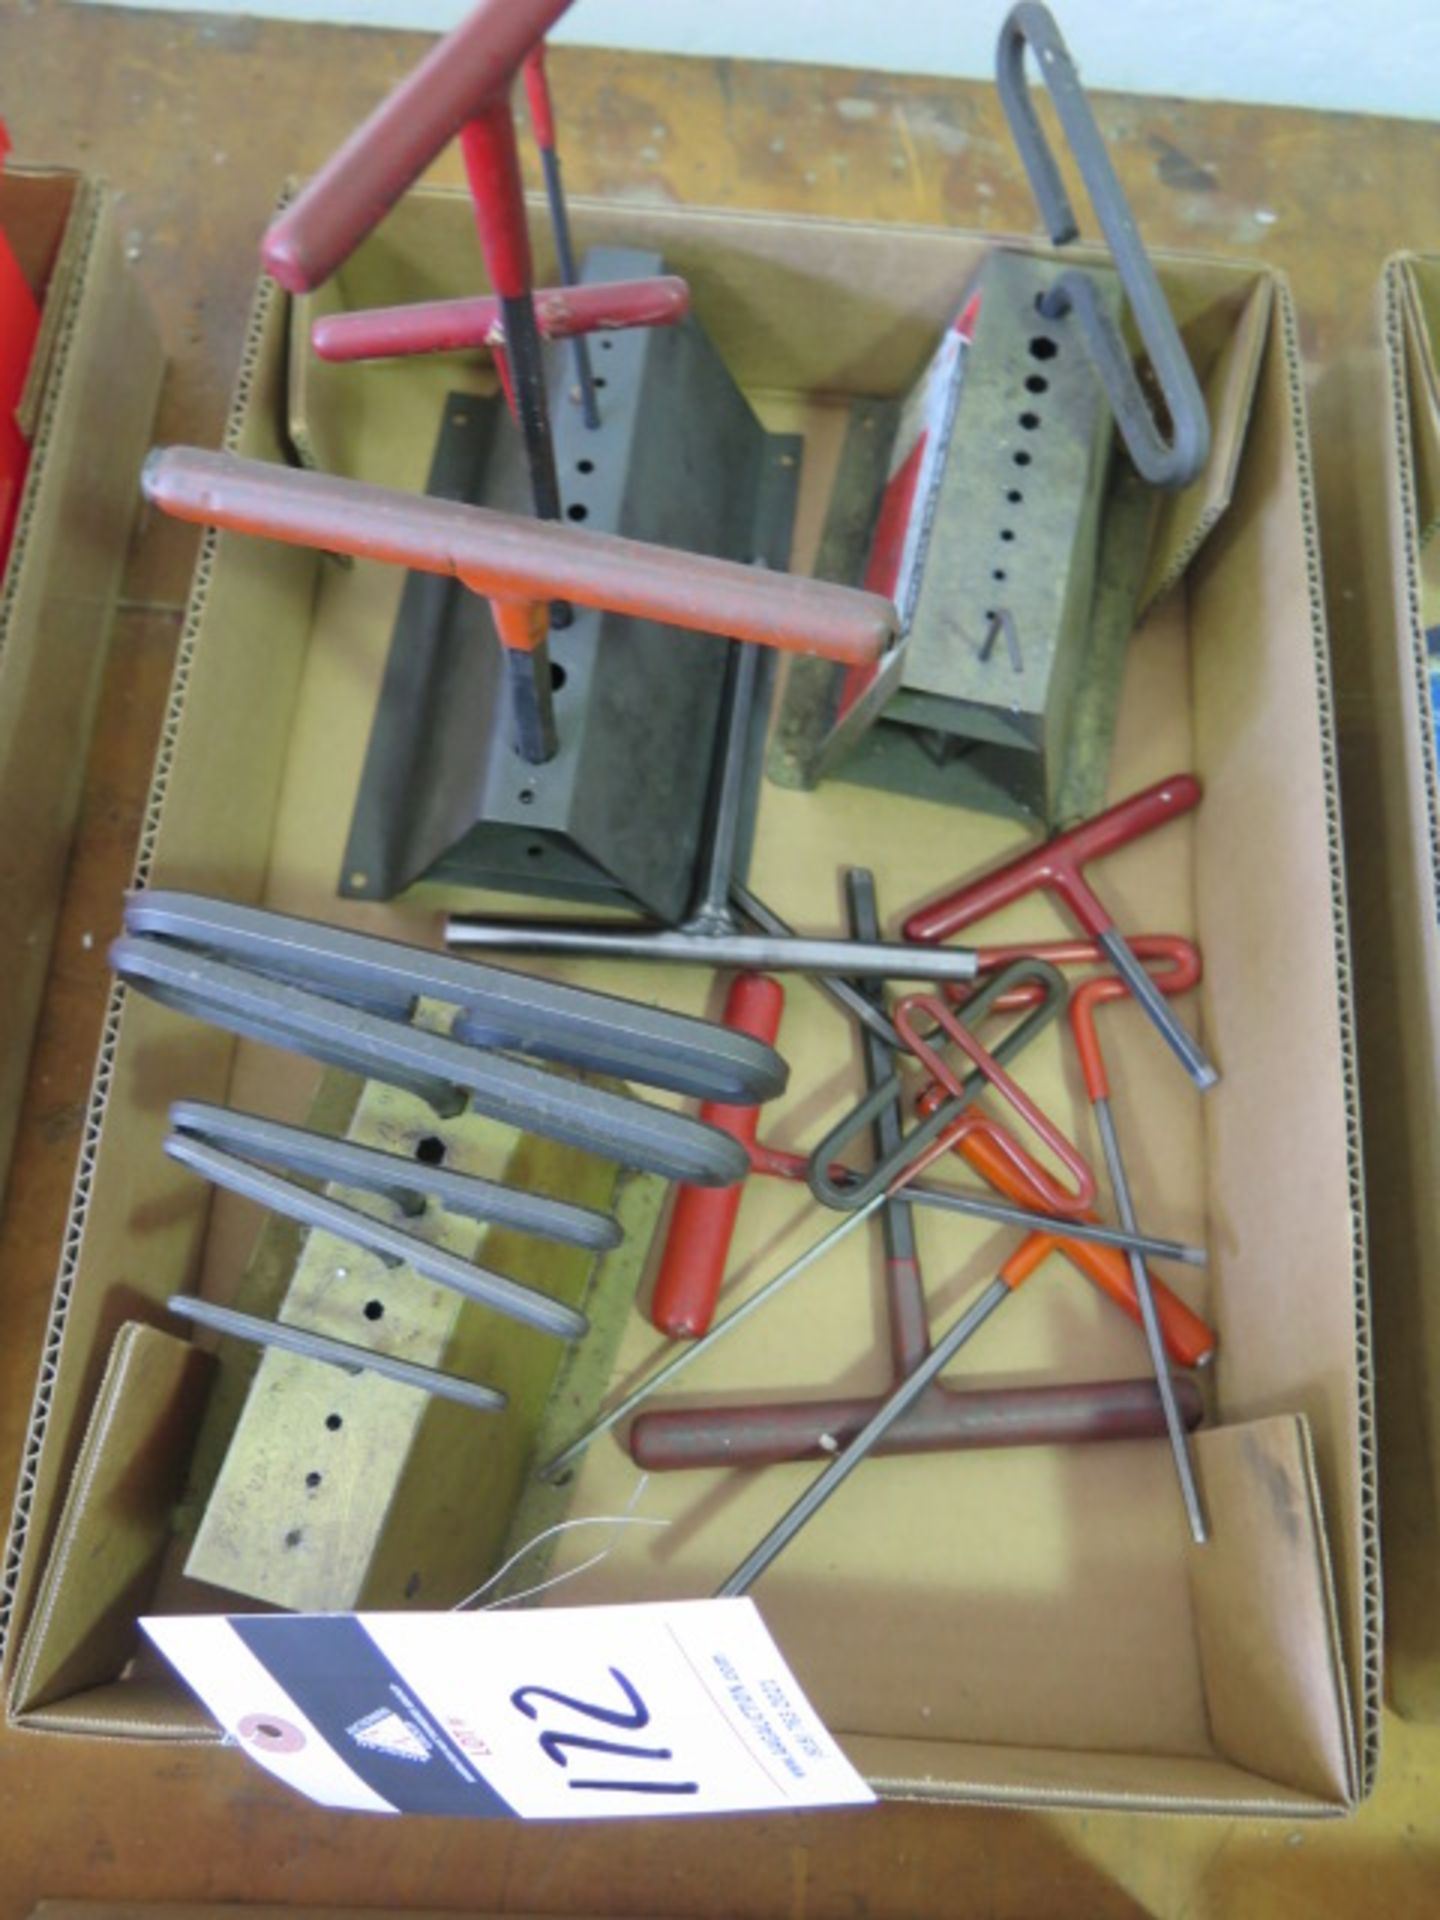 Allen Wrenches - Image 2 of 2